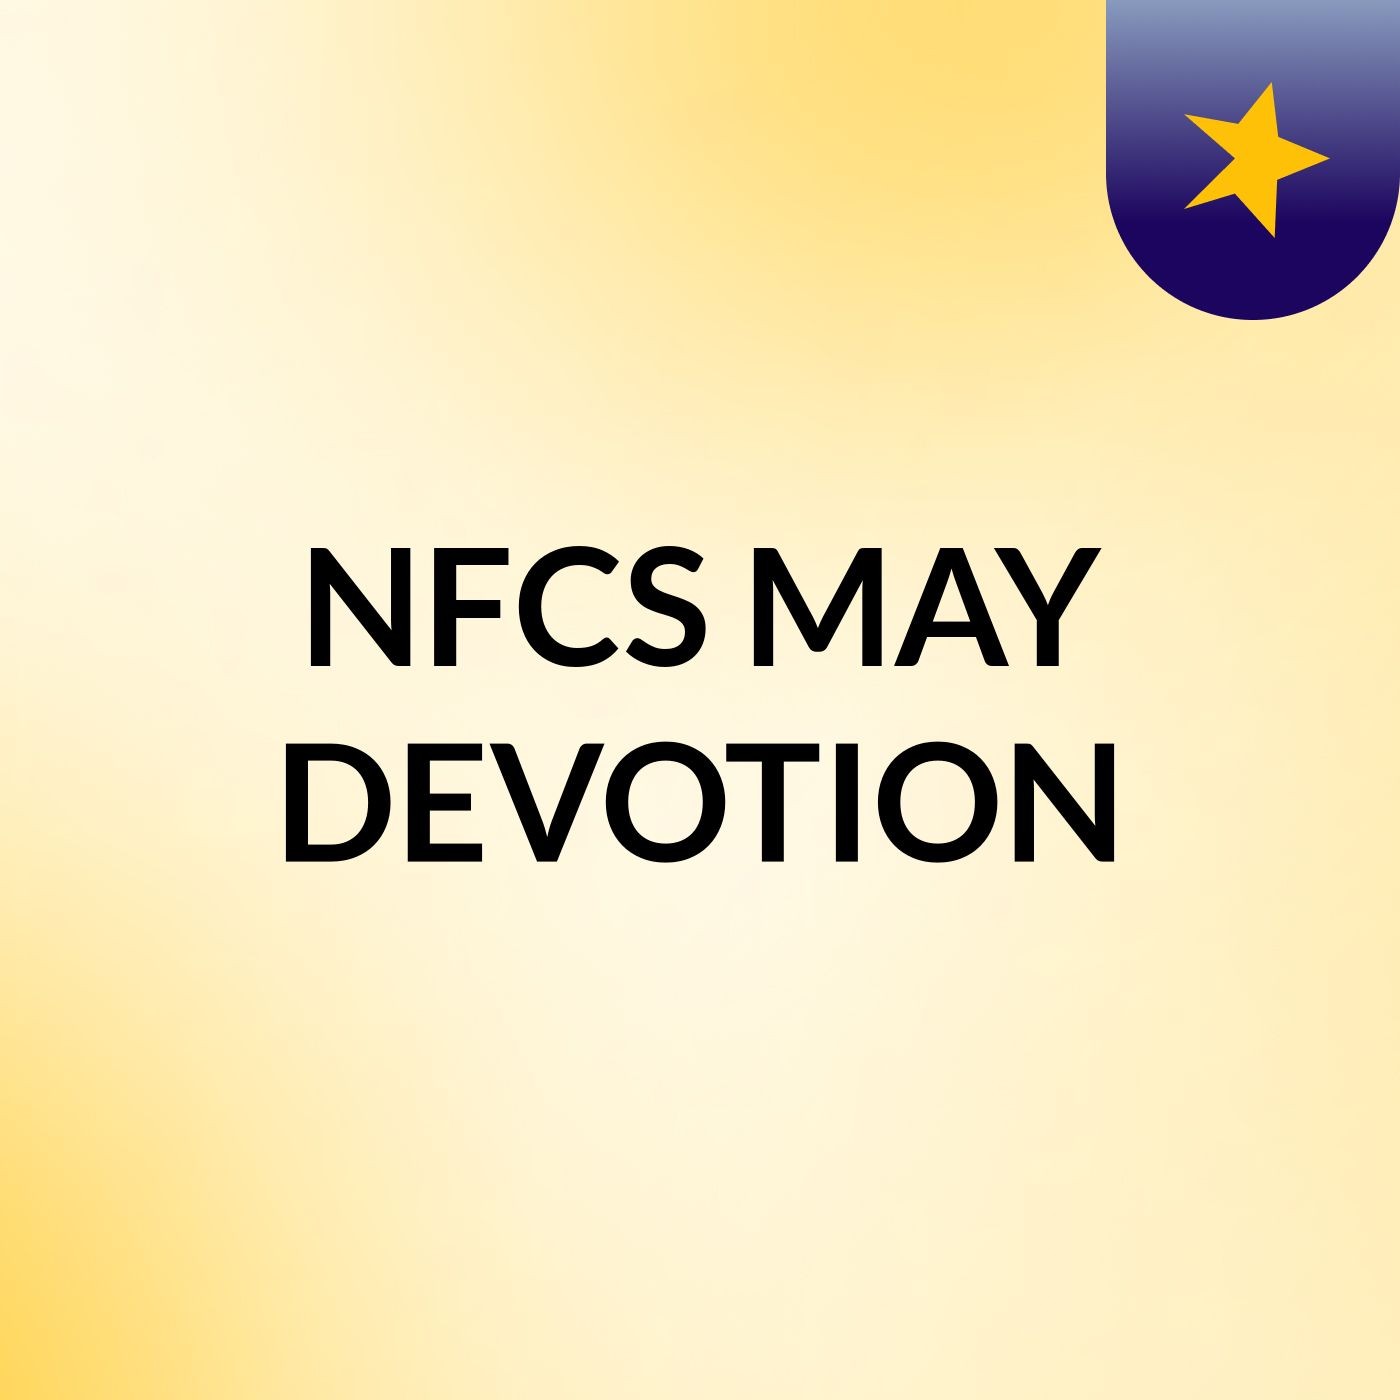 NFCS MAY DEVOTION